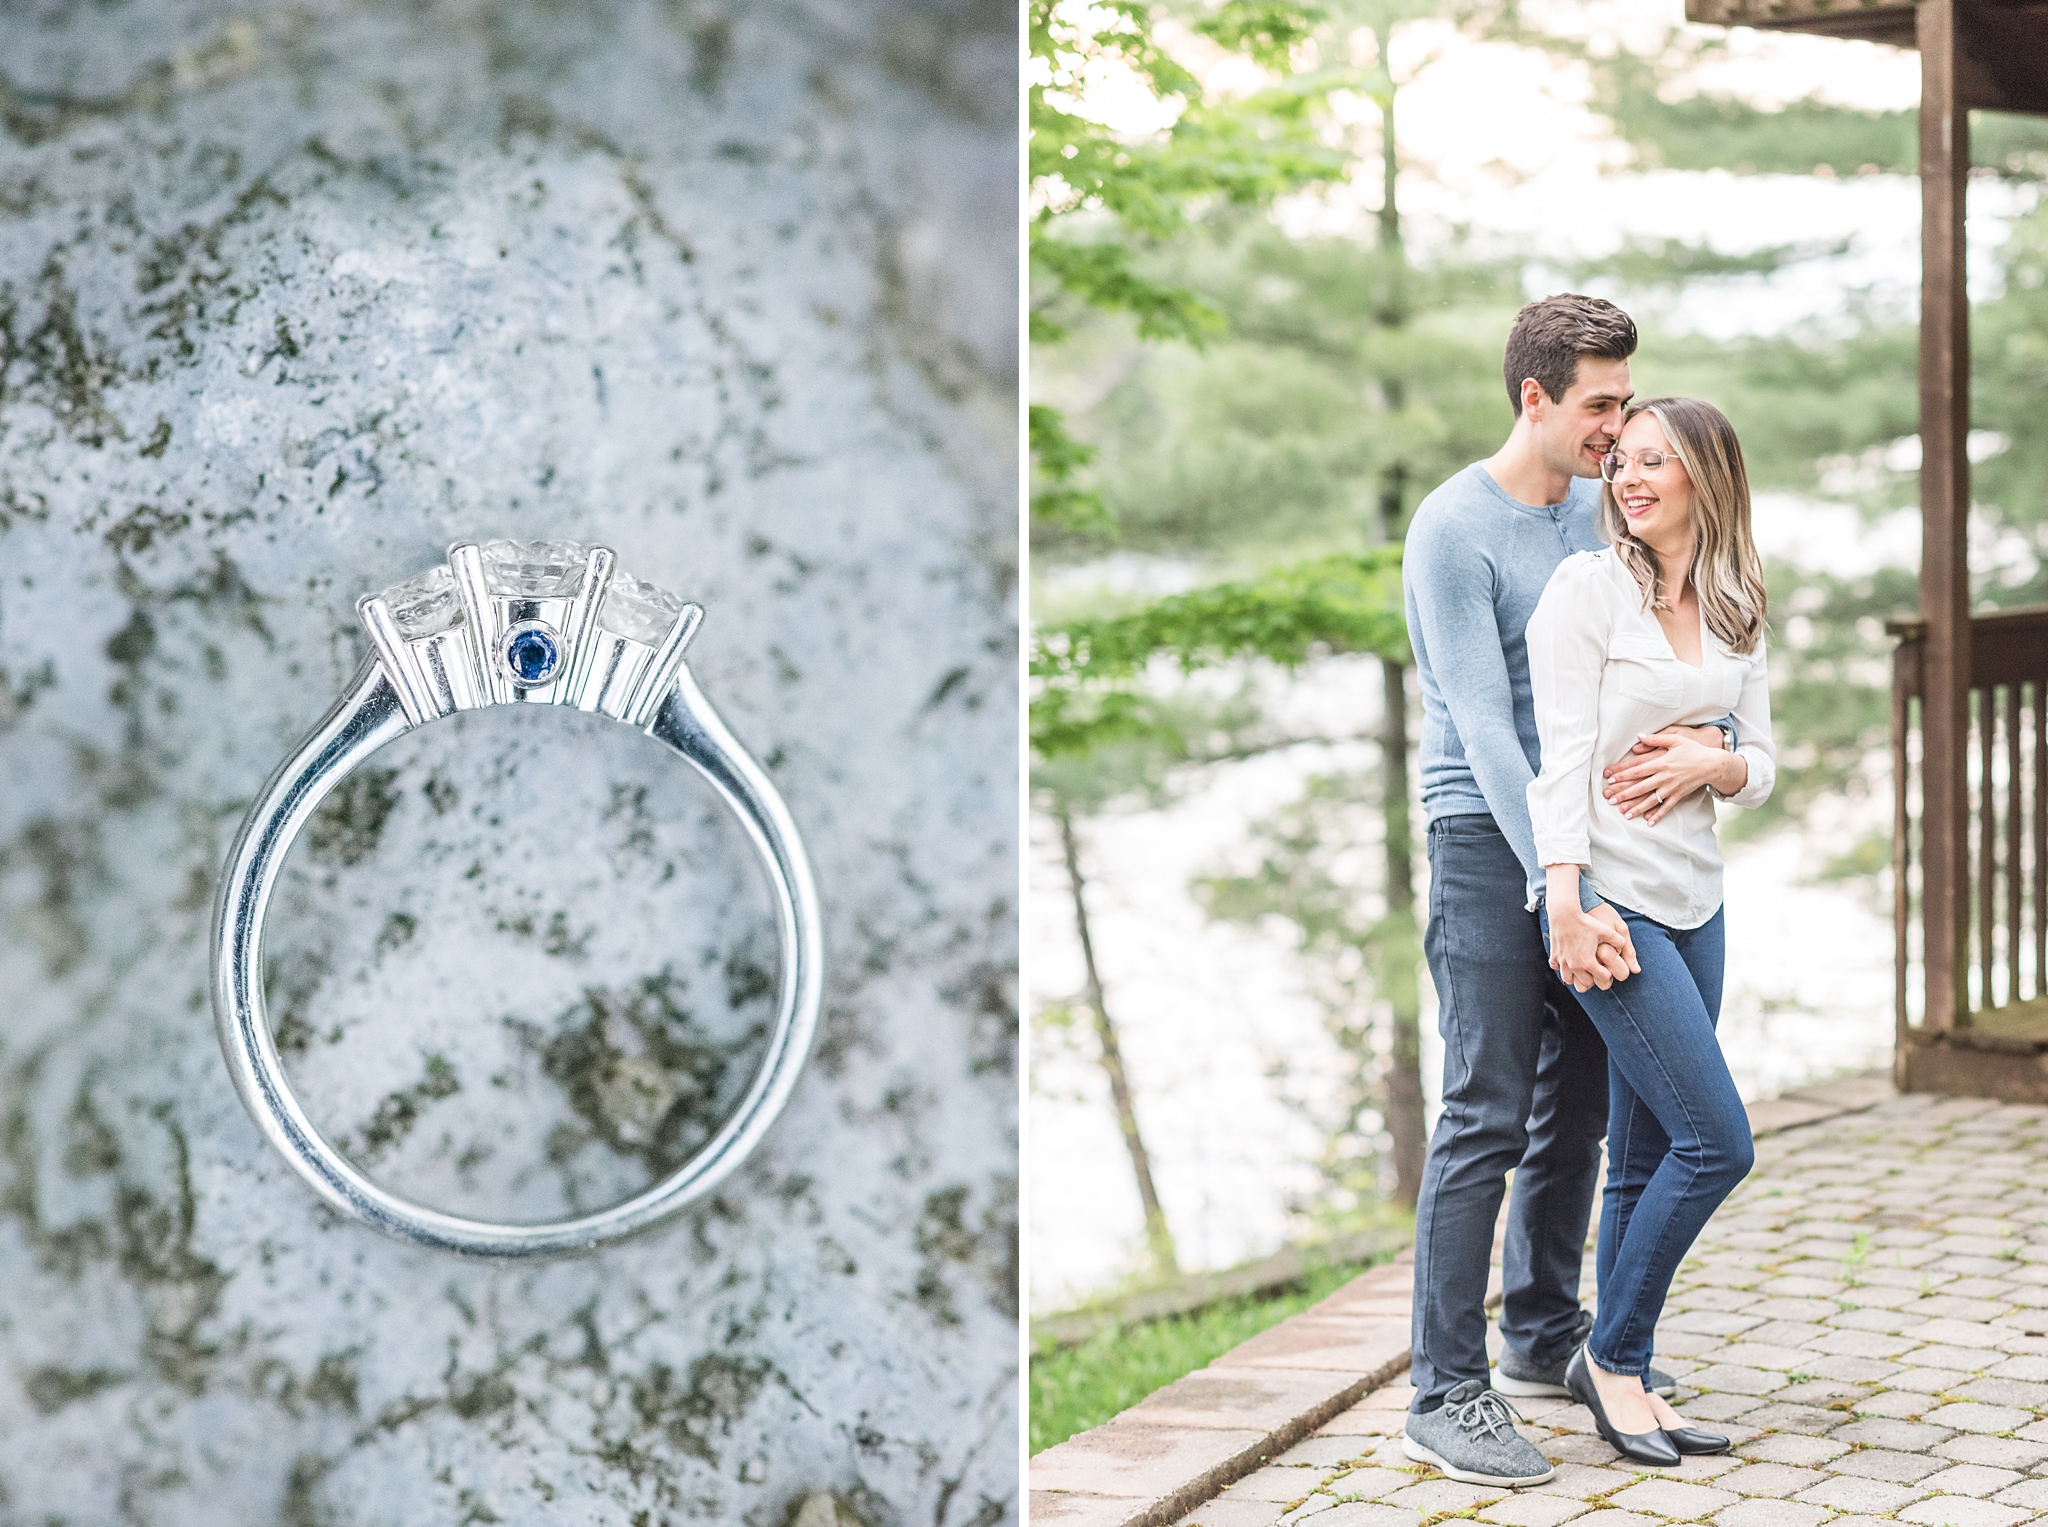 Spring Sharbot Lake Engagement Photos | Ottawa Engagement Photos | Cottage Sharbot Lake Engagement Session Get more inspiration from this adorable waterside engagement session. #ottawaengagement #weddingphotography #ottawaweddings